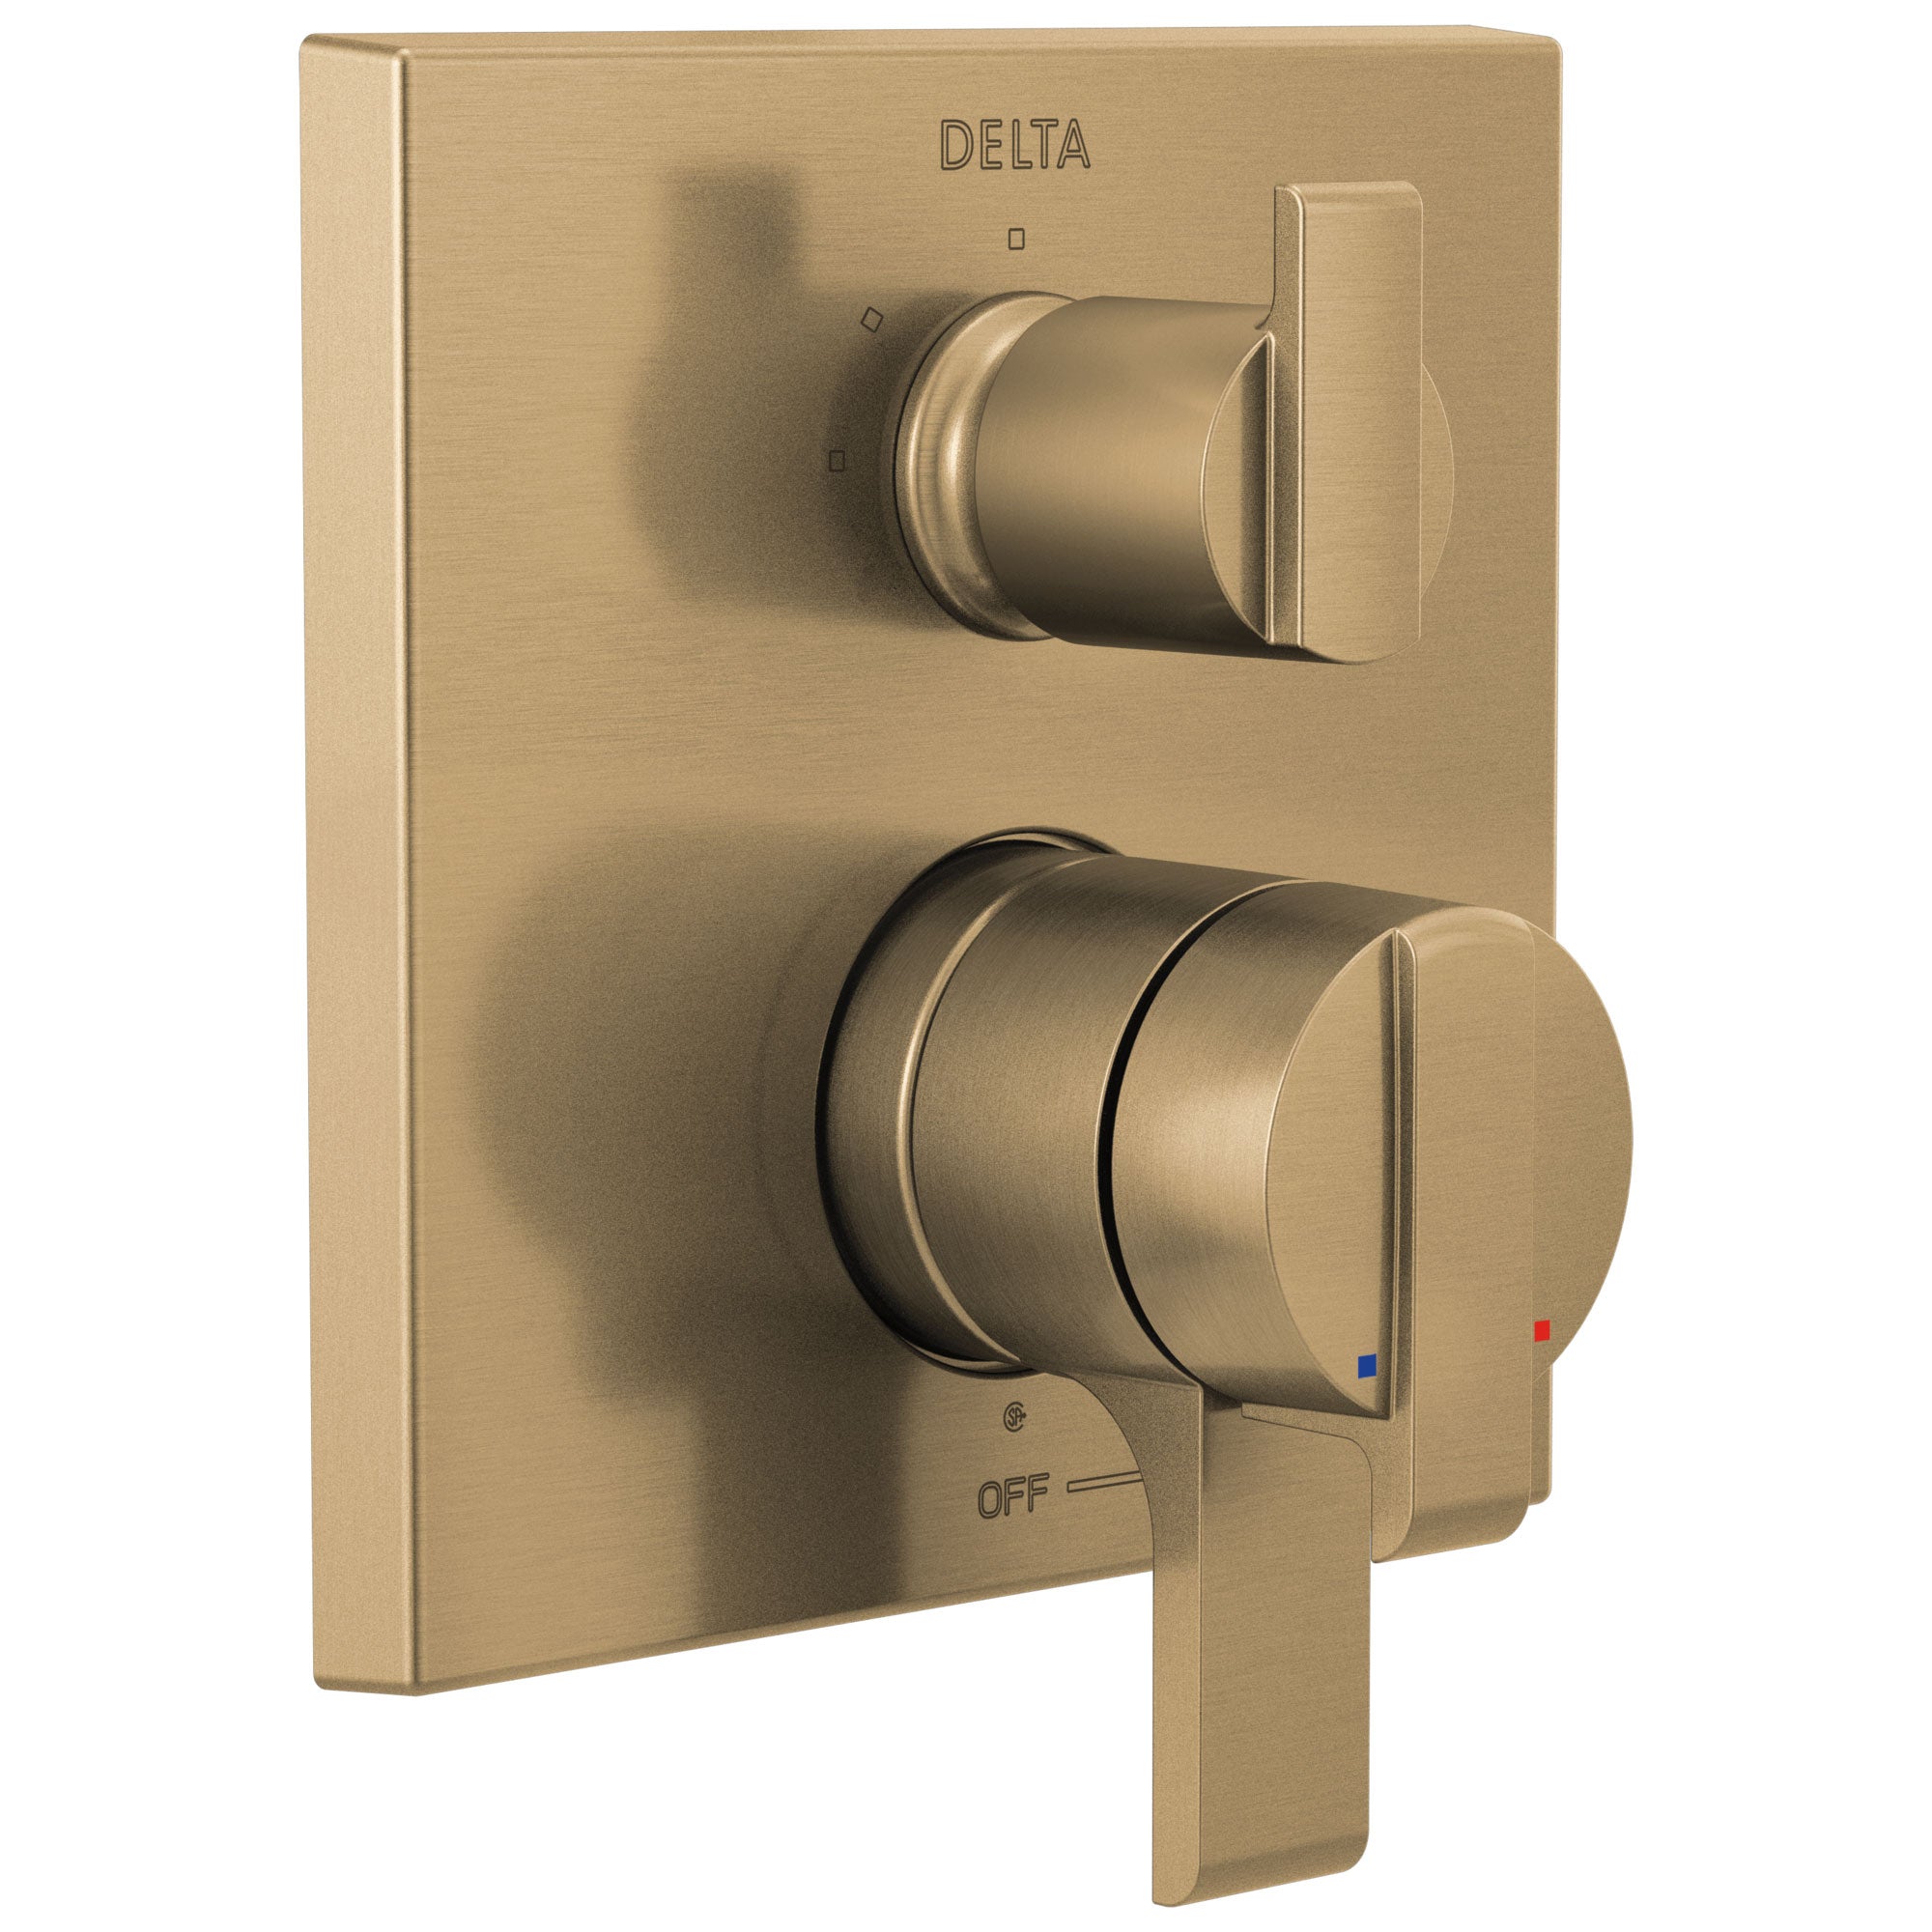 Delta Ara Champagne Bronze Finish Angular Modern 17 Series Shower Faucet Control with 3-Setting Integrated Diverter Includes Valve and Handles D3151V